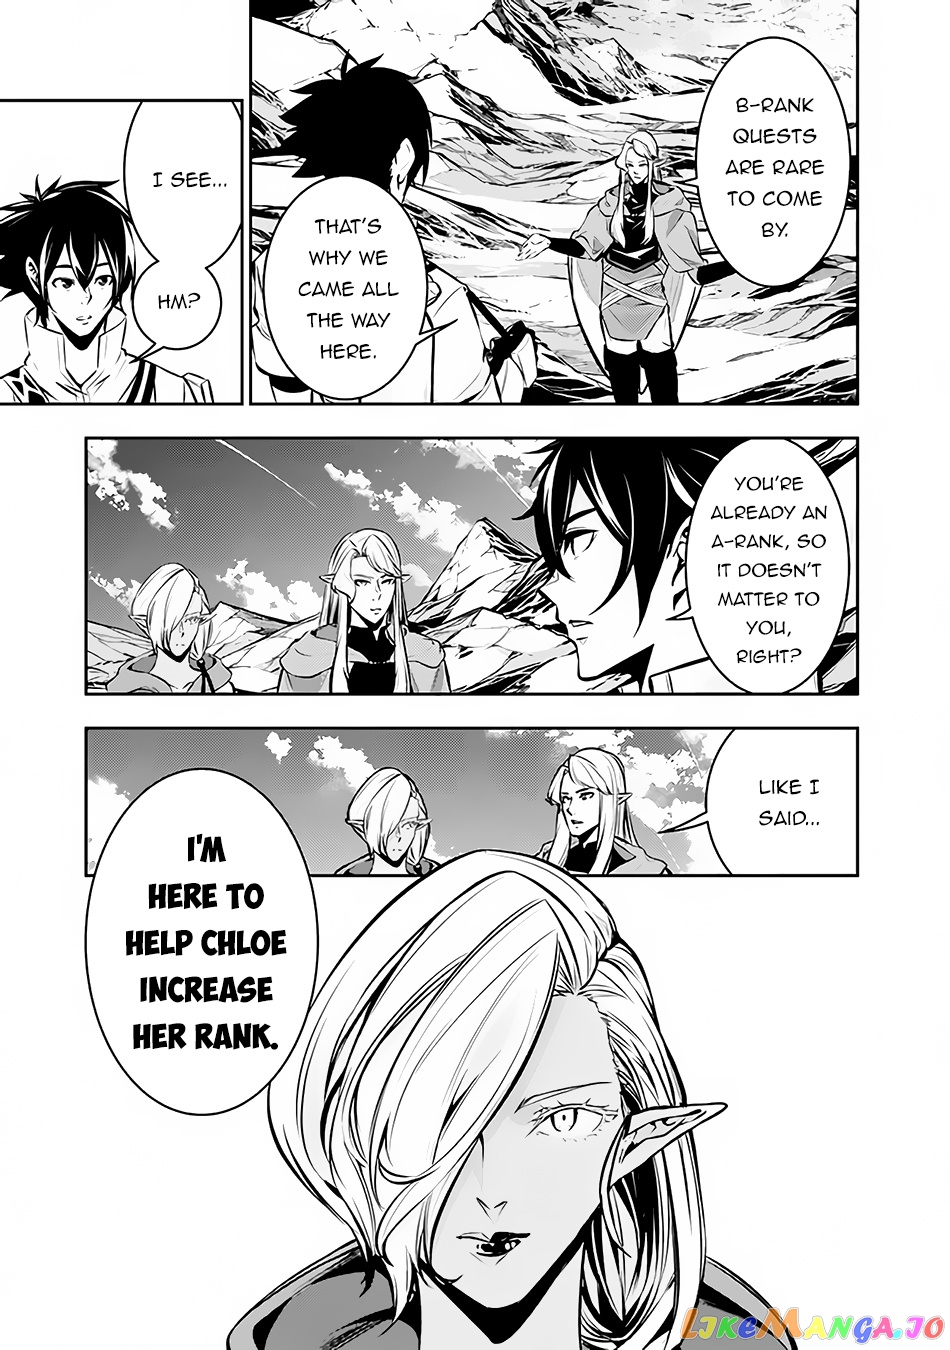 The Strongest Magical Swordsman Ever Reborn As An F-Rank Adventurer. chapter 91 - page 6